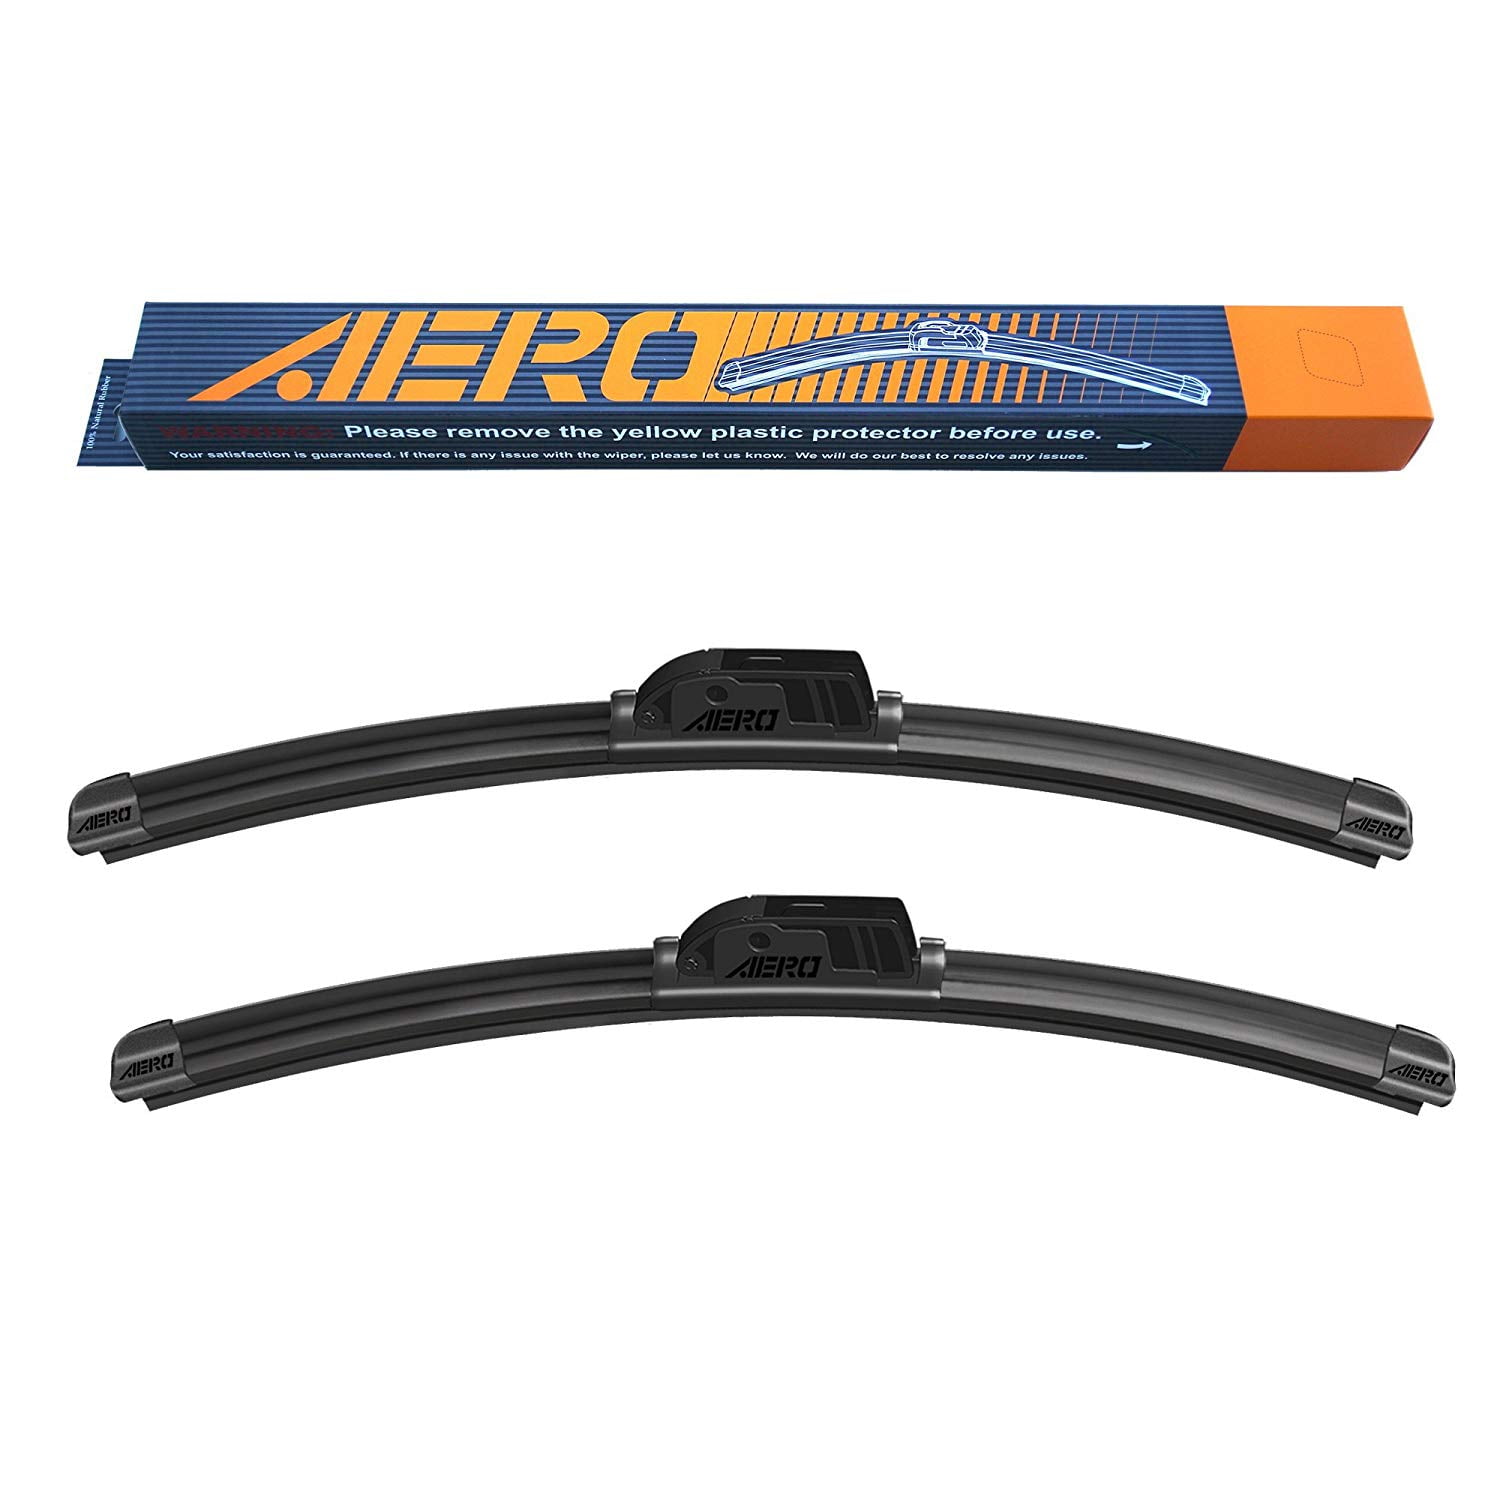 Wiper Blades For VW Jetta Fit Push Button Arms 24"&19"  From 2011-2017 USCG